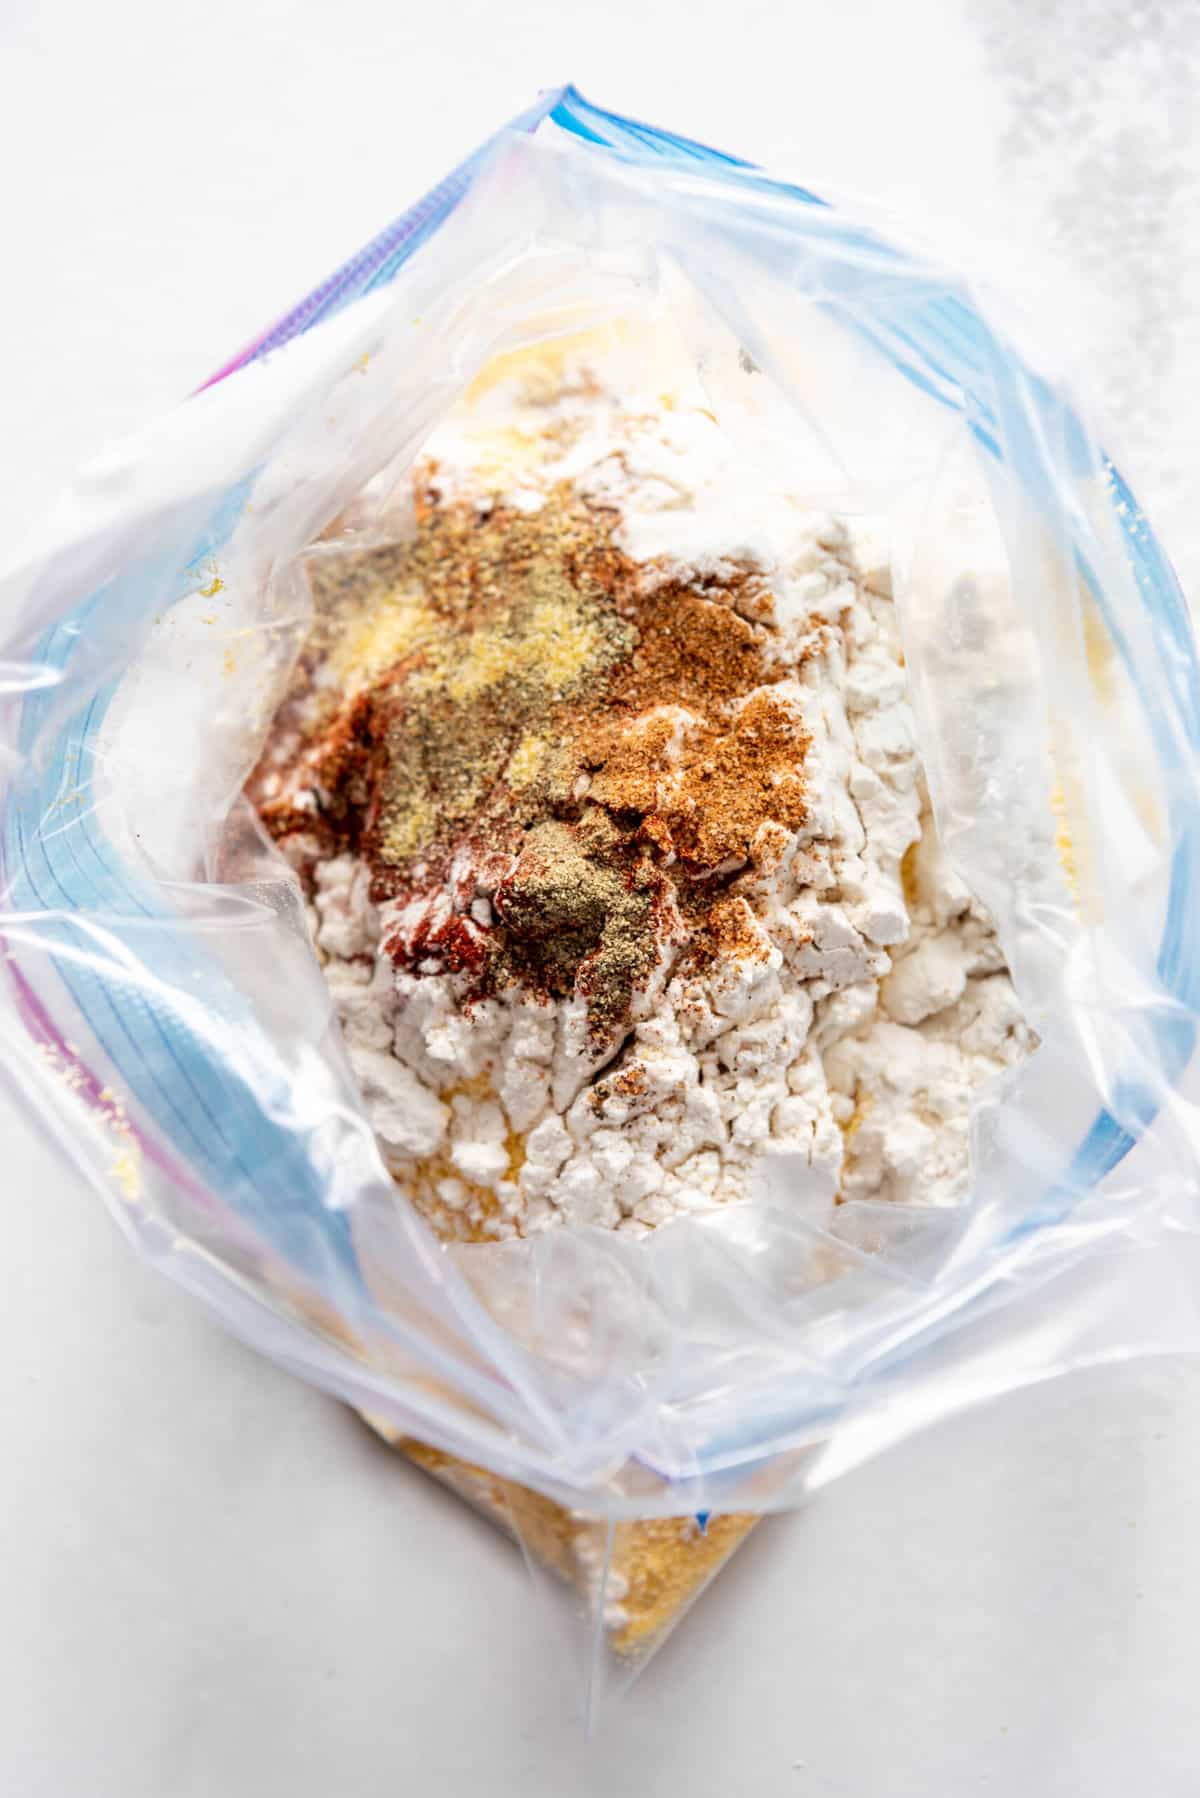 Spices, cornmeal, and flour in a large ziplock bag for coating catfish filets for frying.